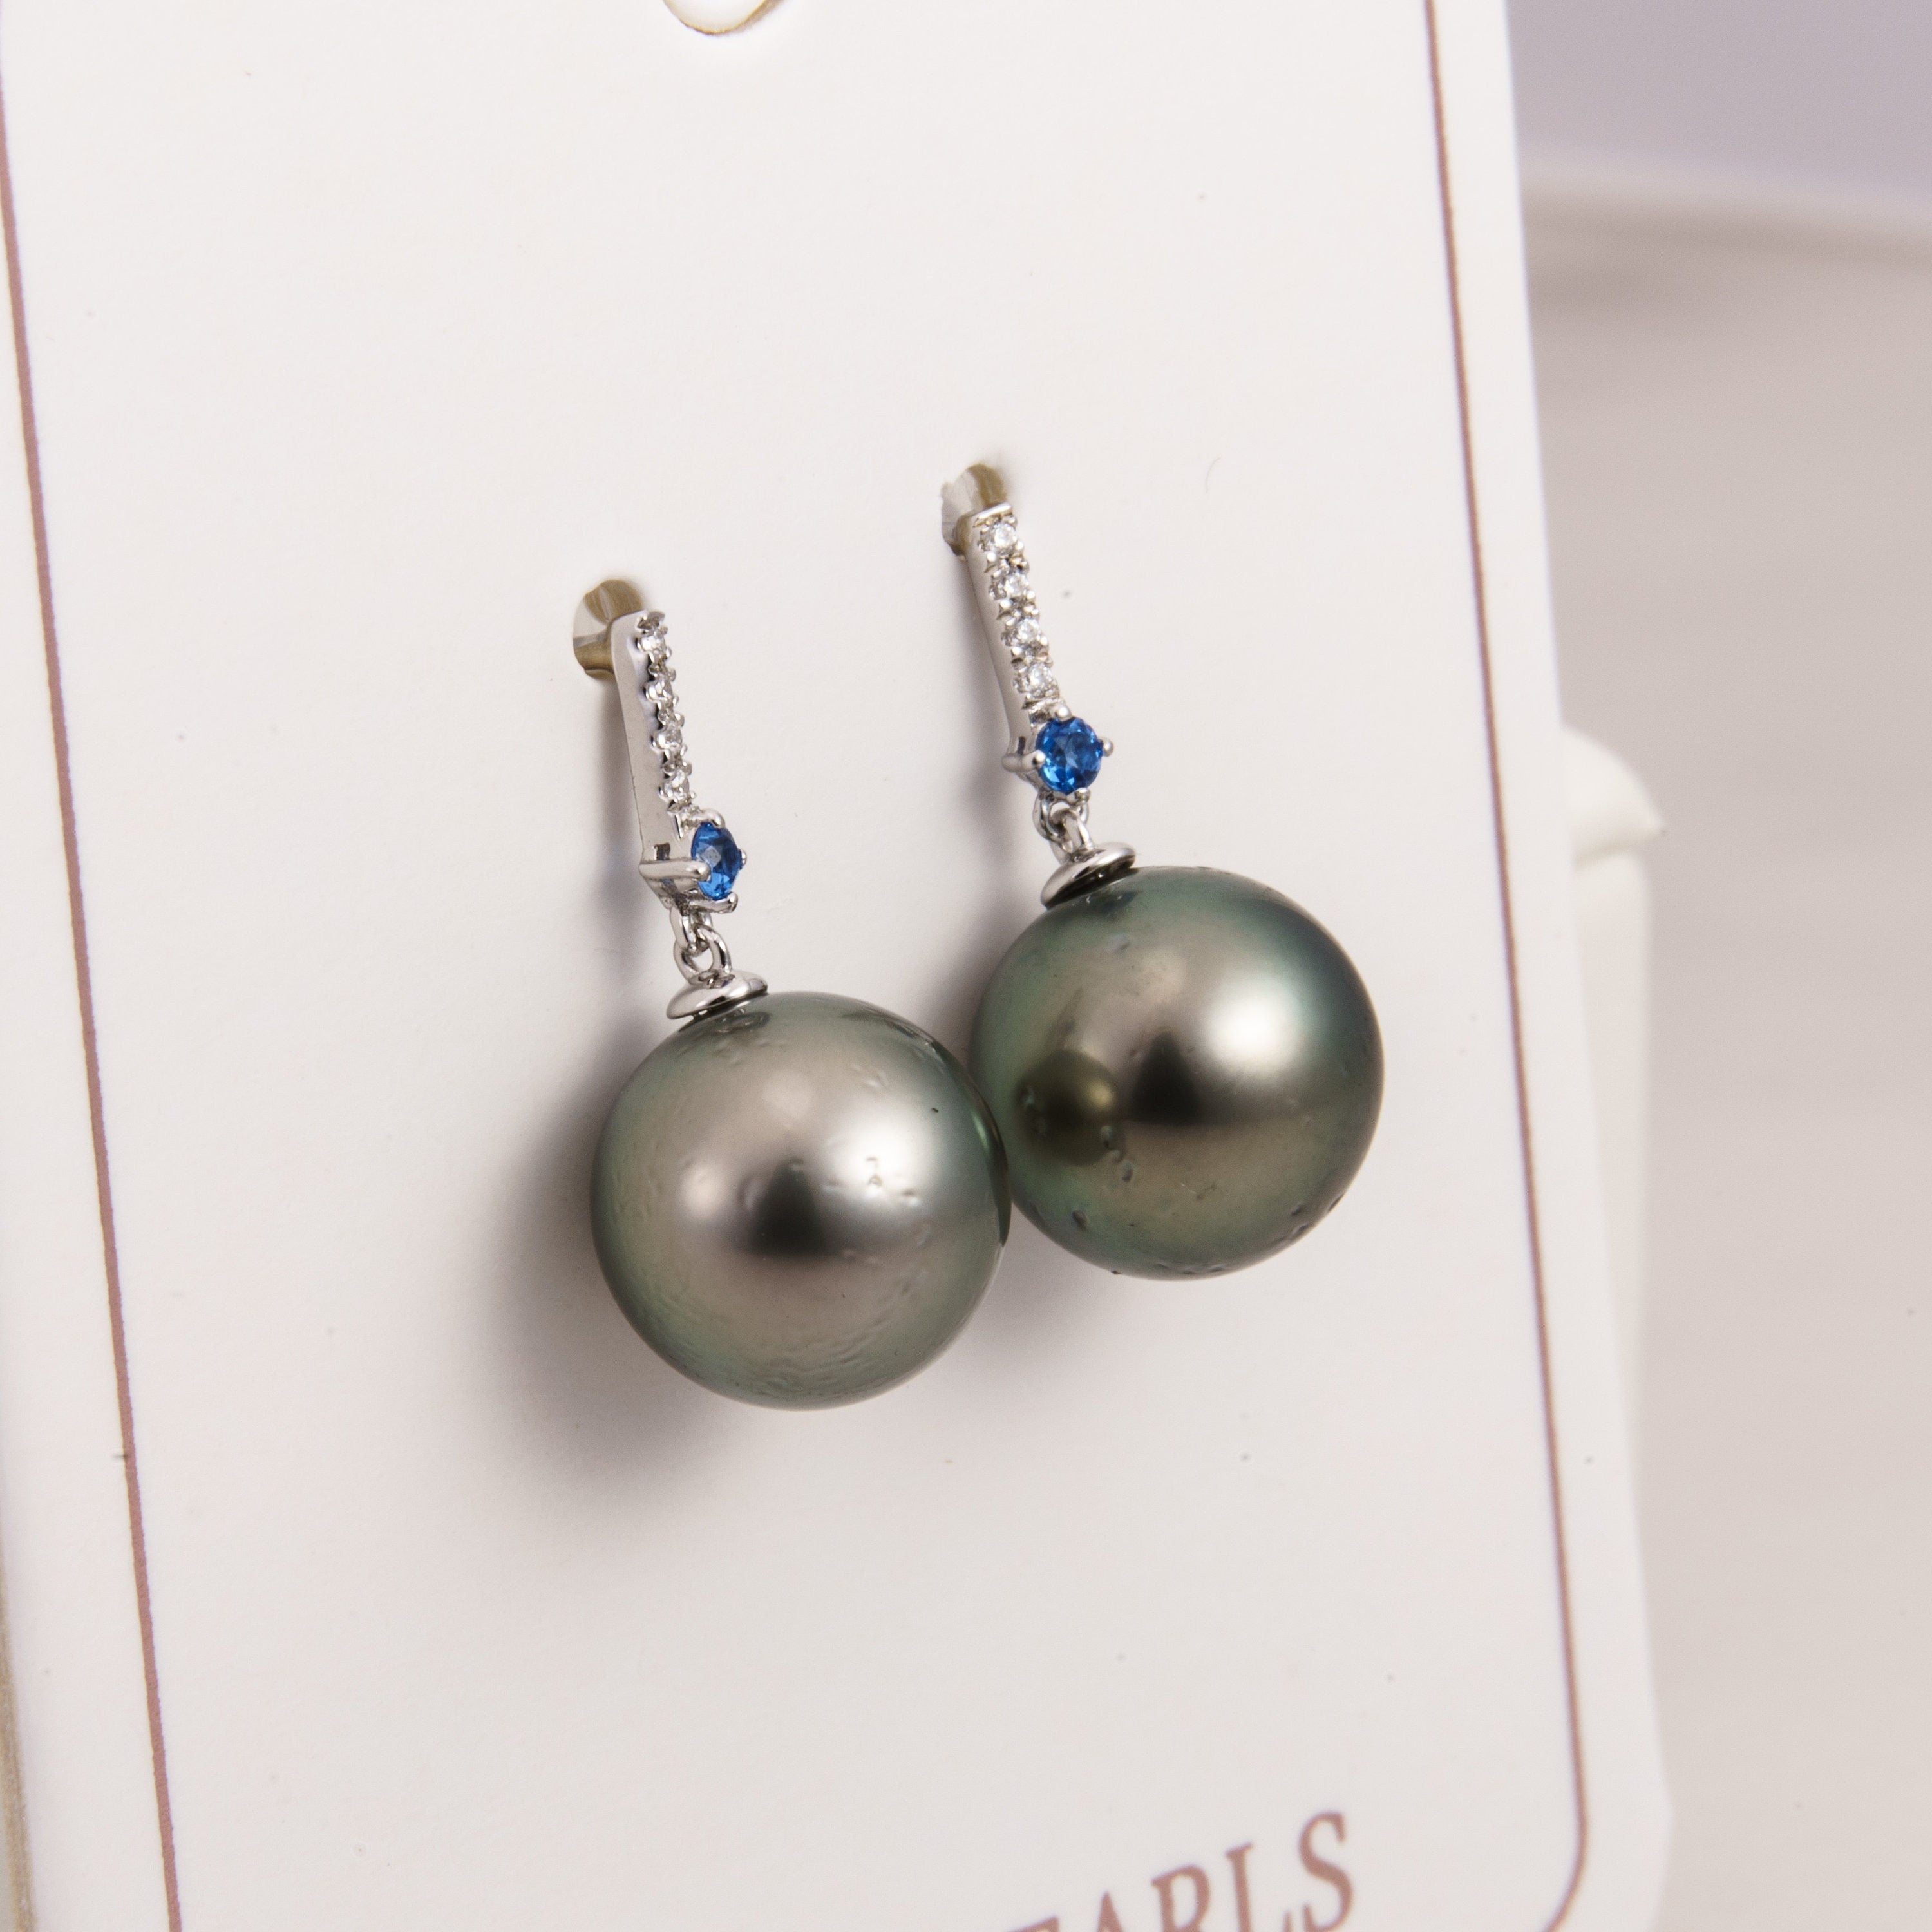 Tahitian pearl earrings 9mm, 925 sterling silver with rhodium finish and cubic zirconia